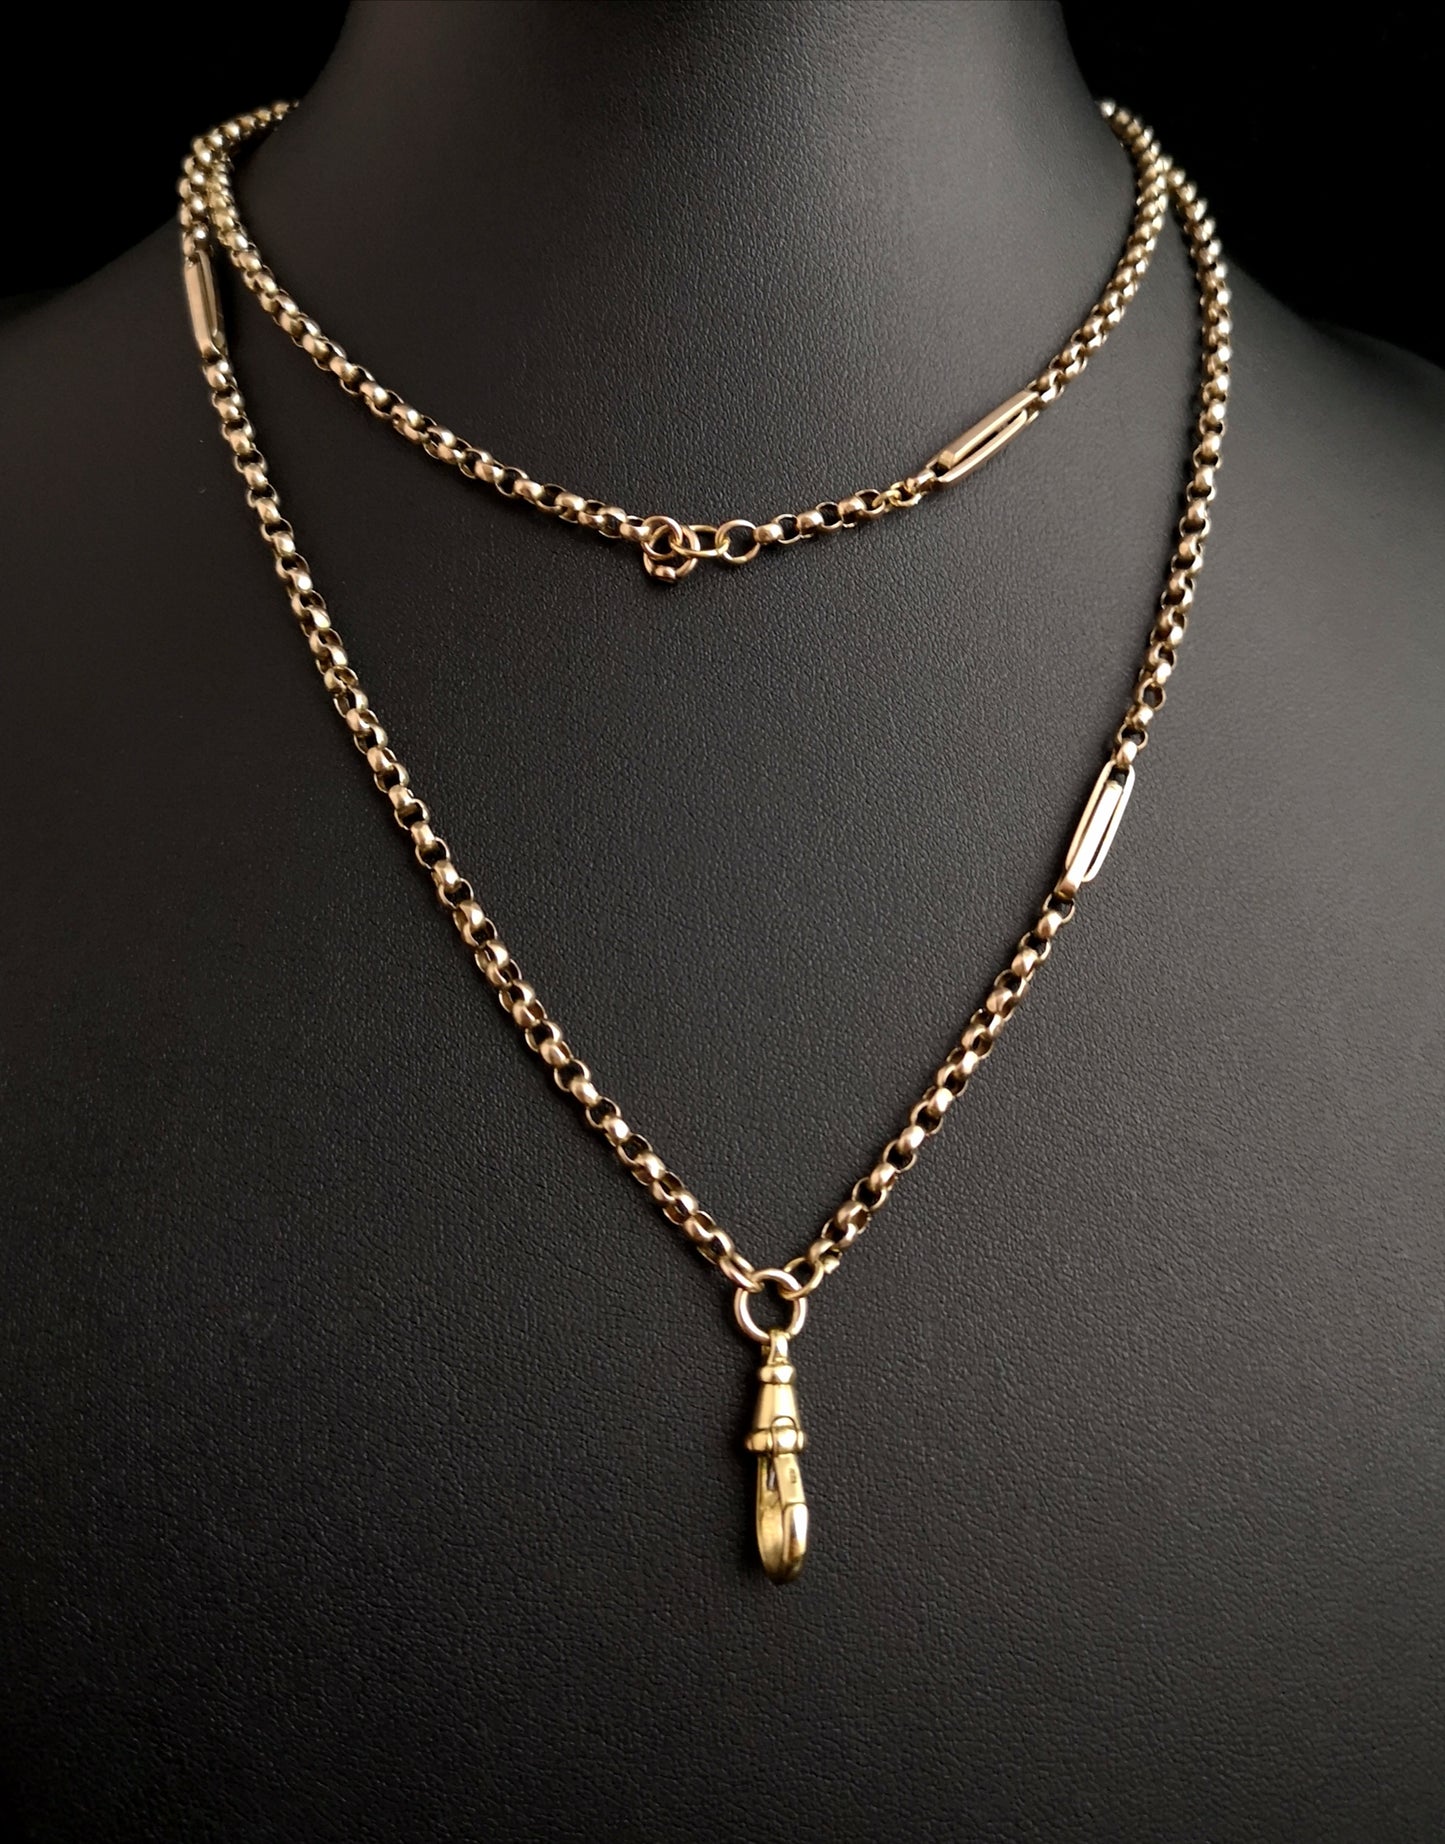 Antique Victorian 9ct gold muff chain, necklace